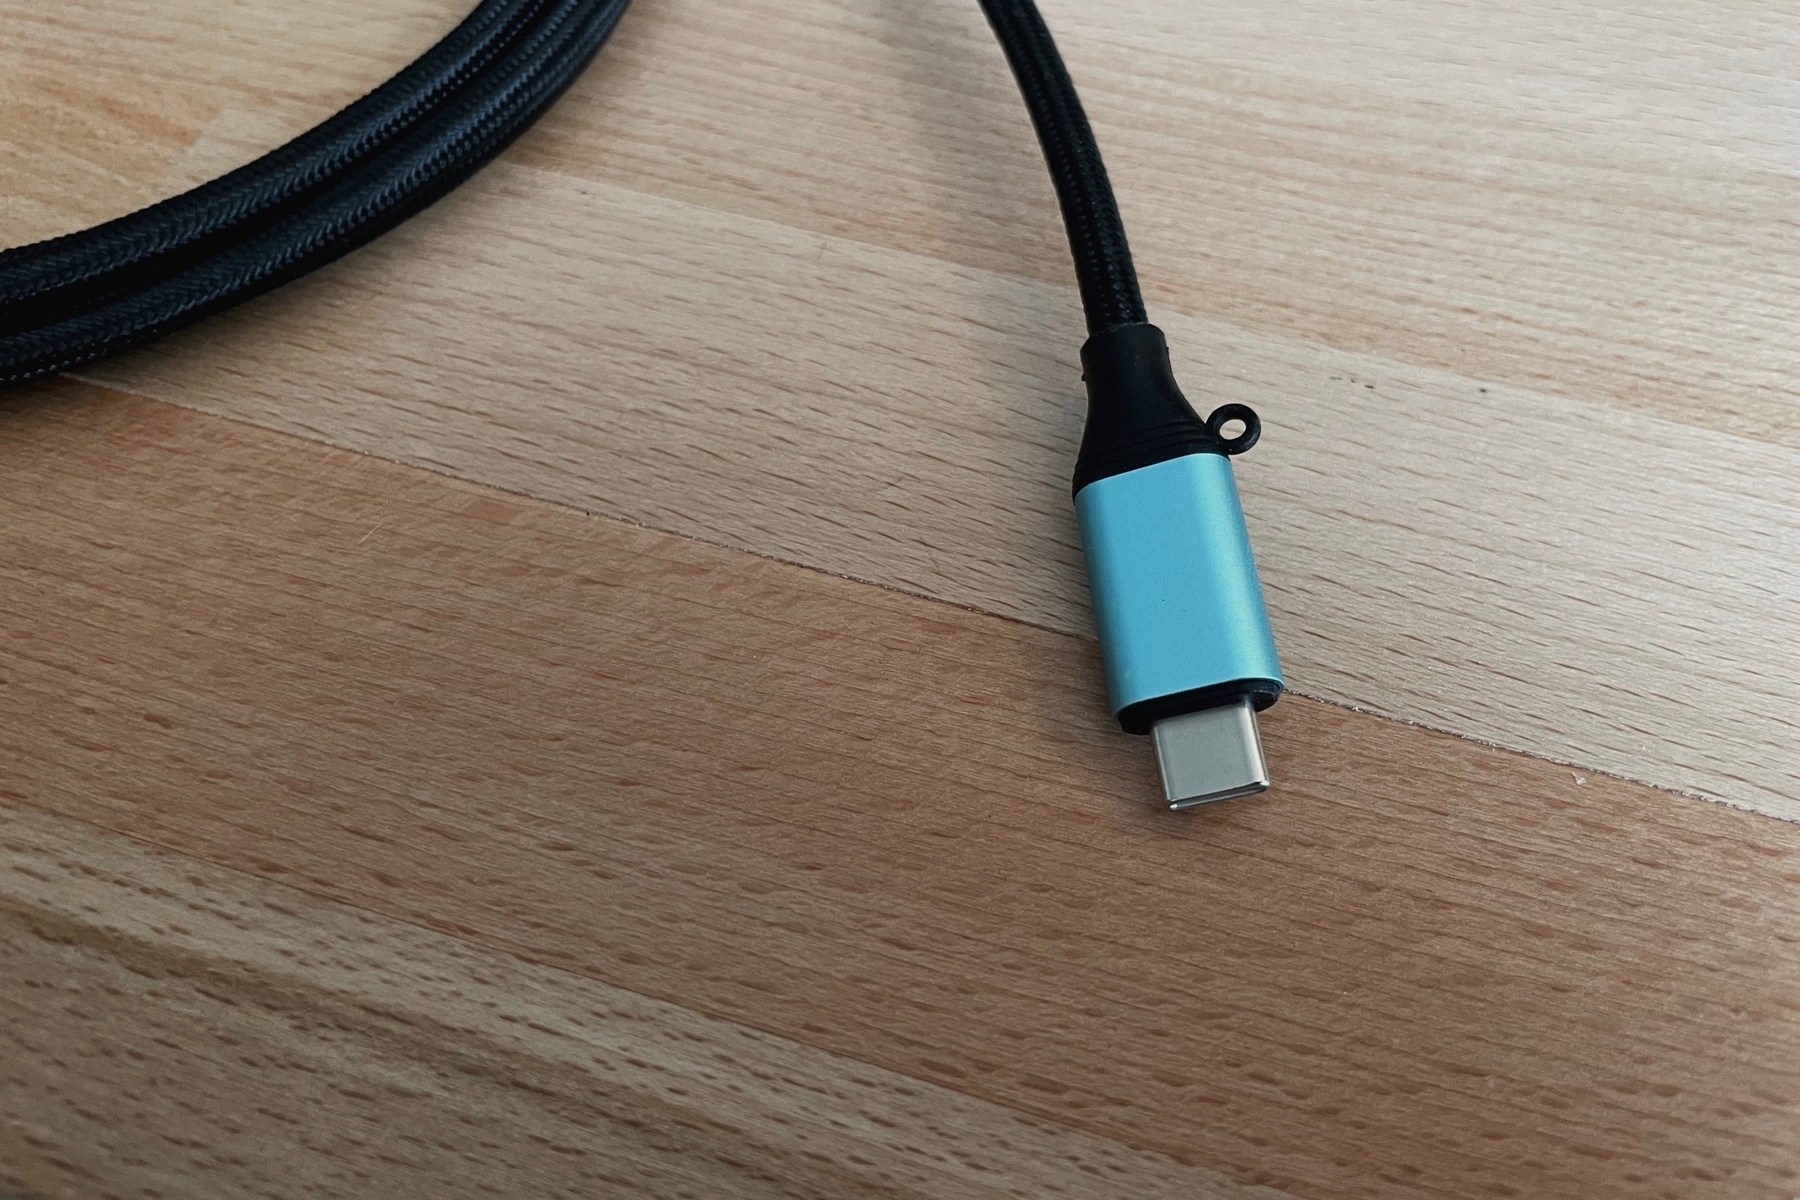 USB-C plug in an ugly color